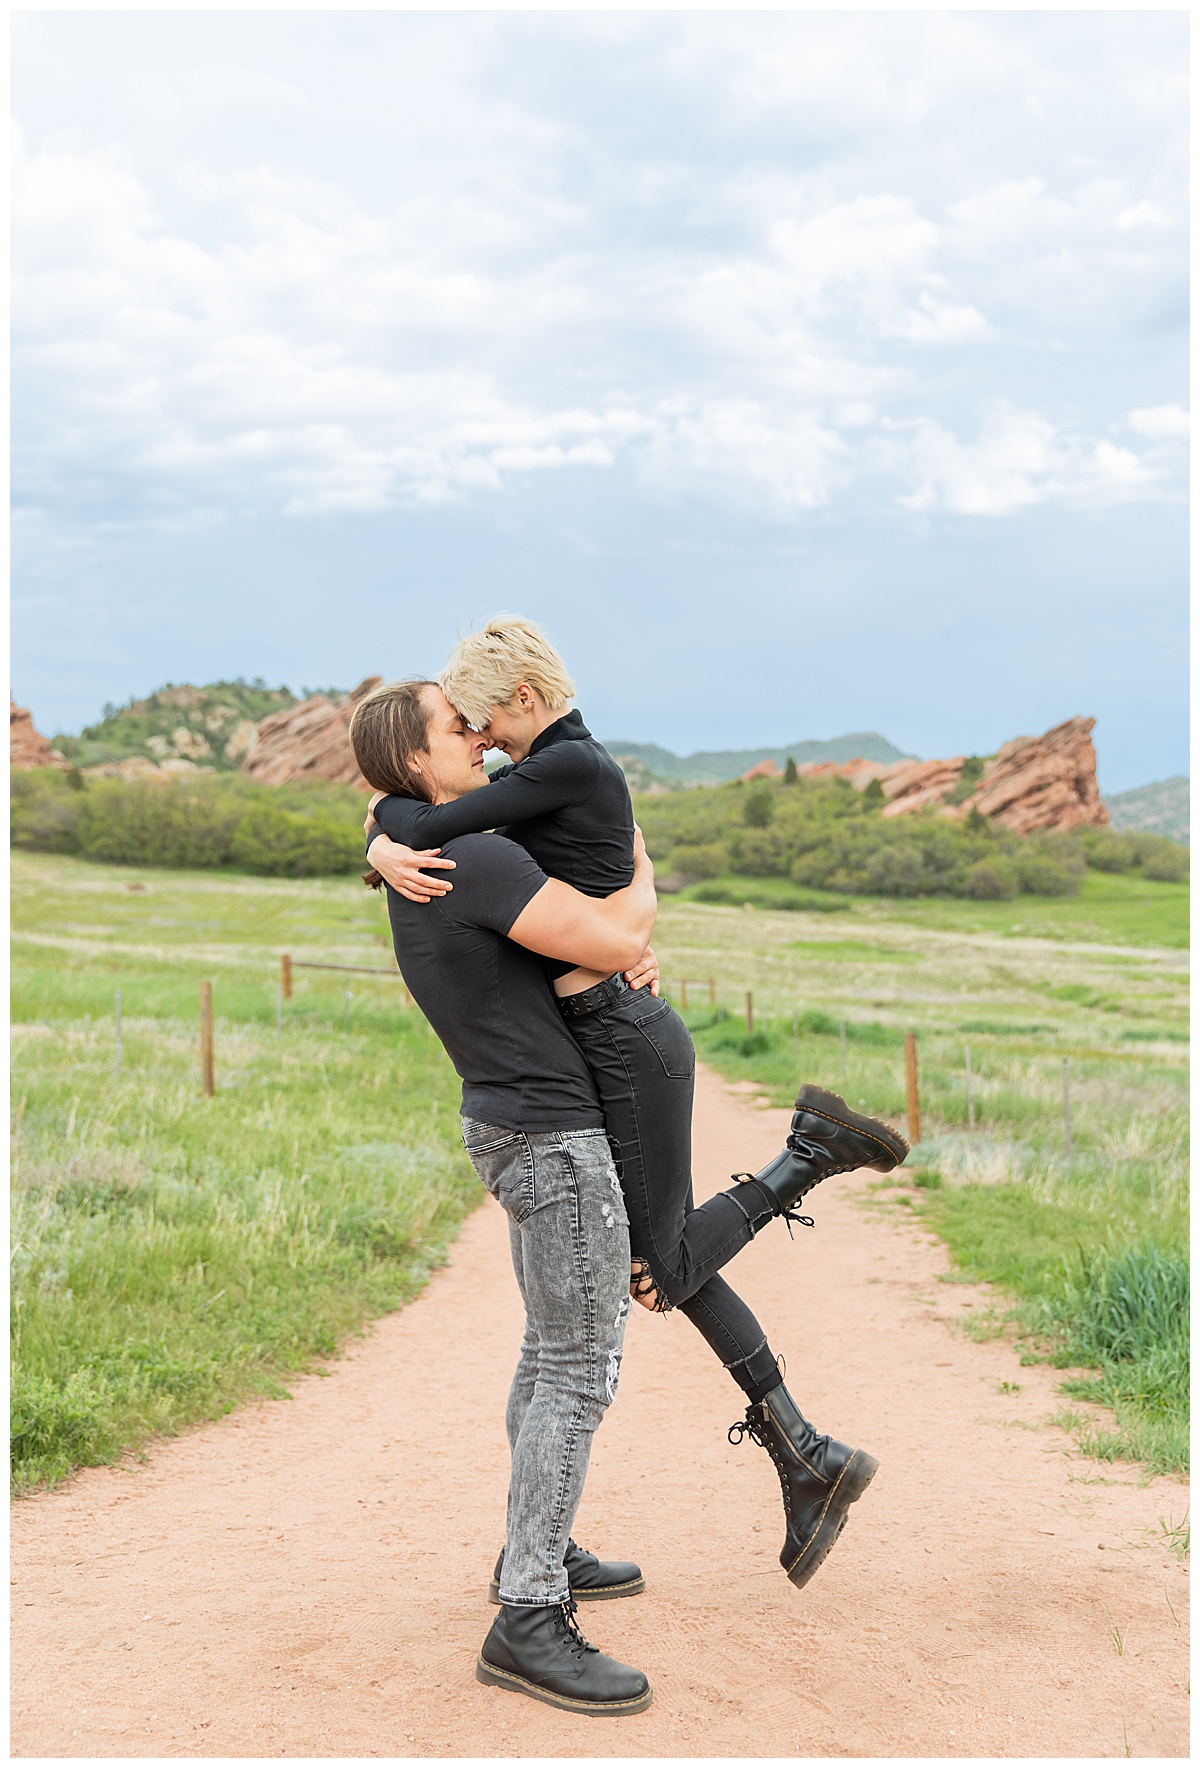 A couple dressed in black pose in front of a field of grass and large red rocks